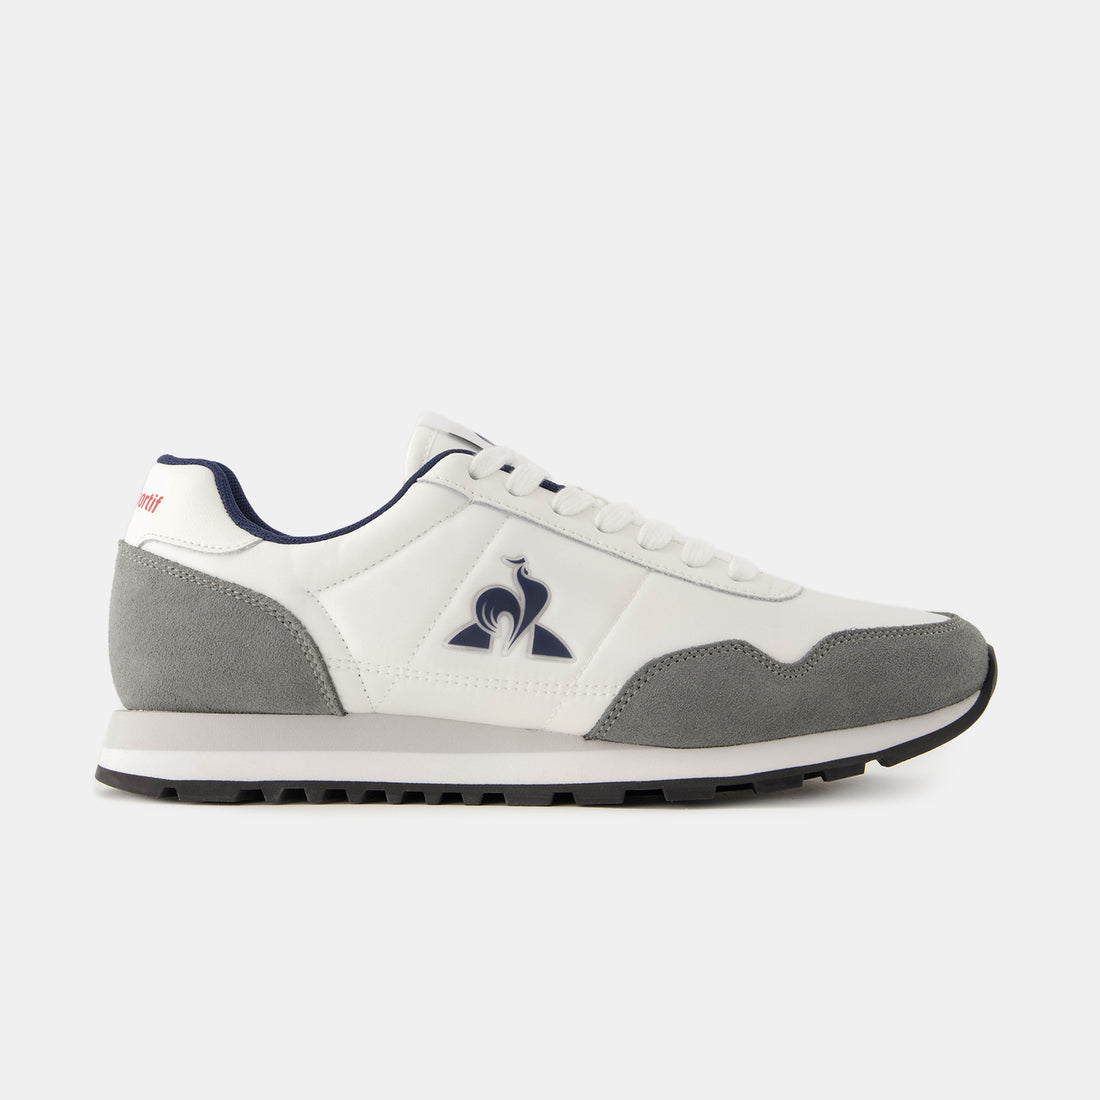 2410502-ASTRA_2 optical white/frost gray | Chaussures ASTRA_2 Homme